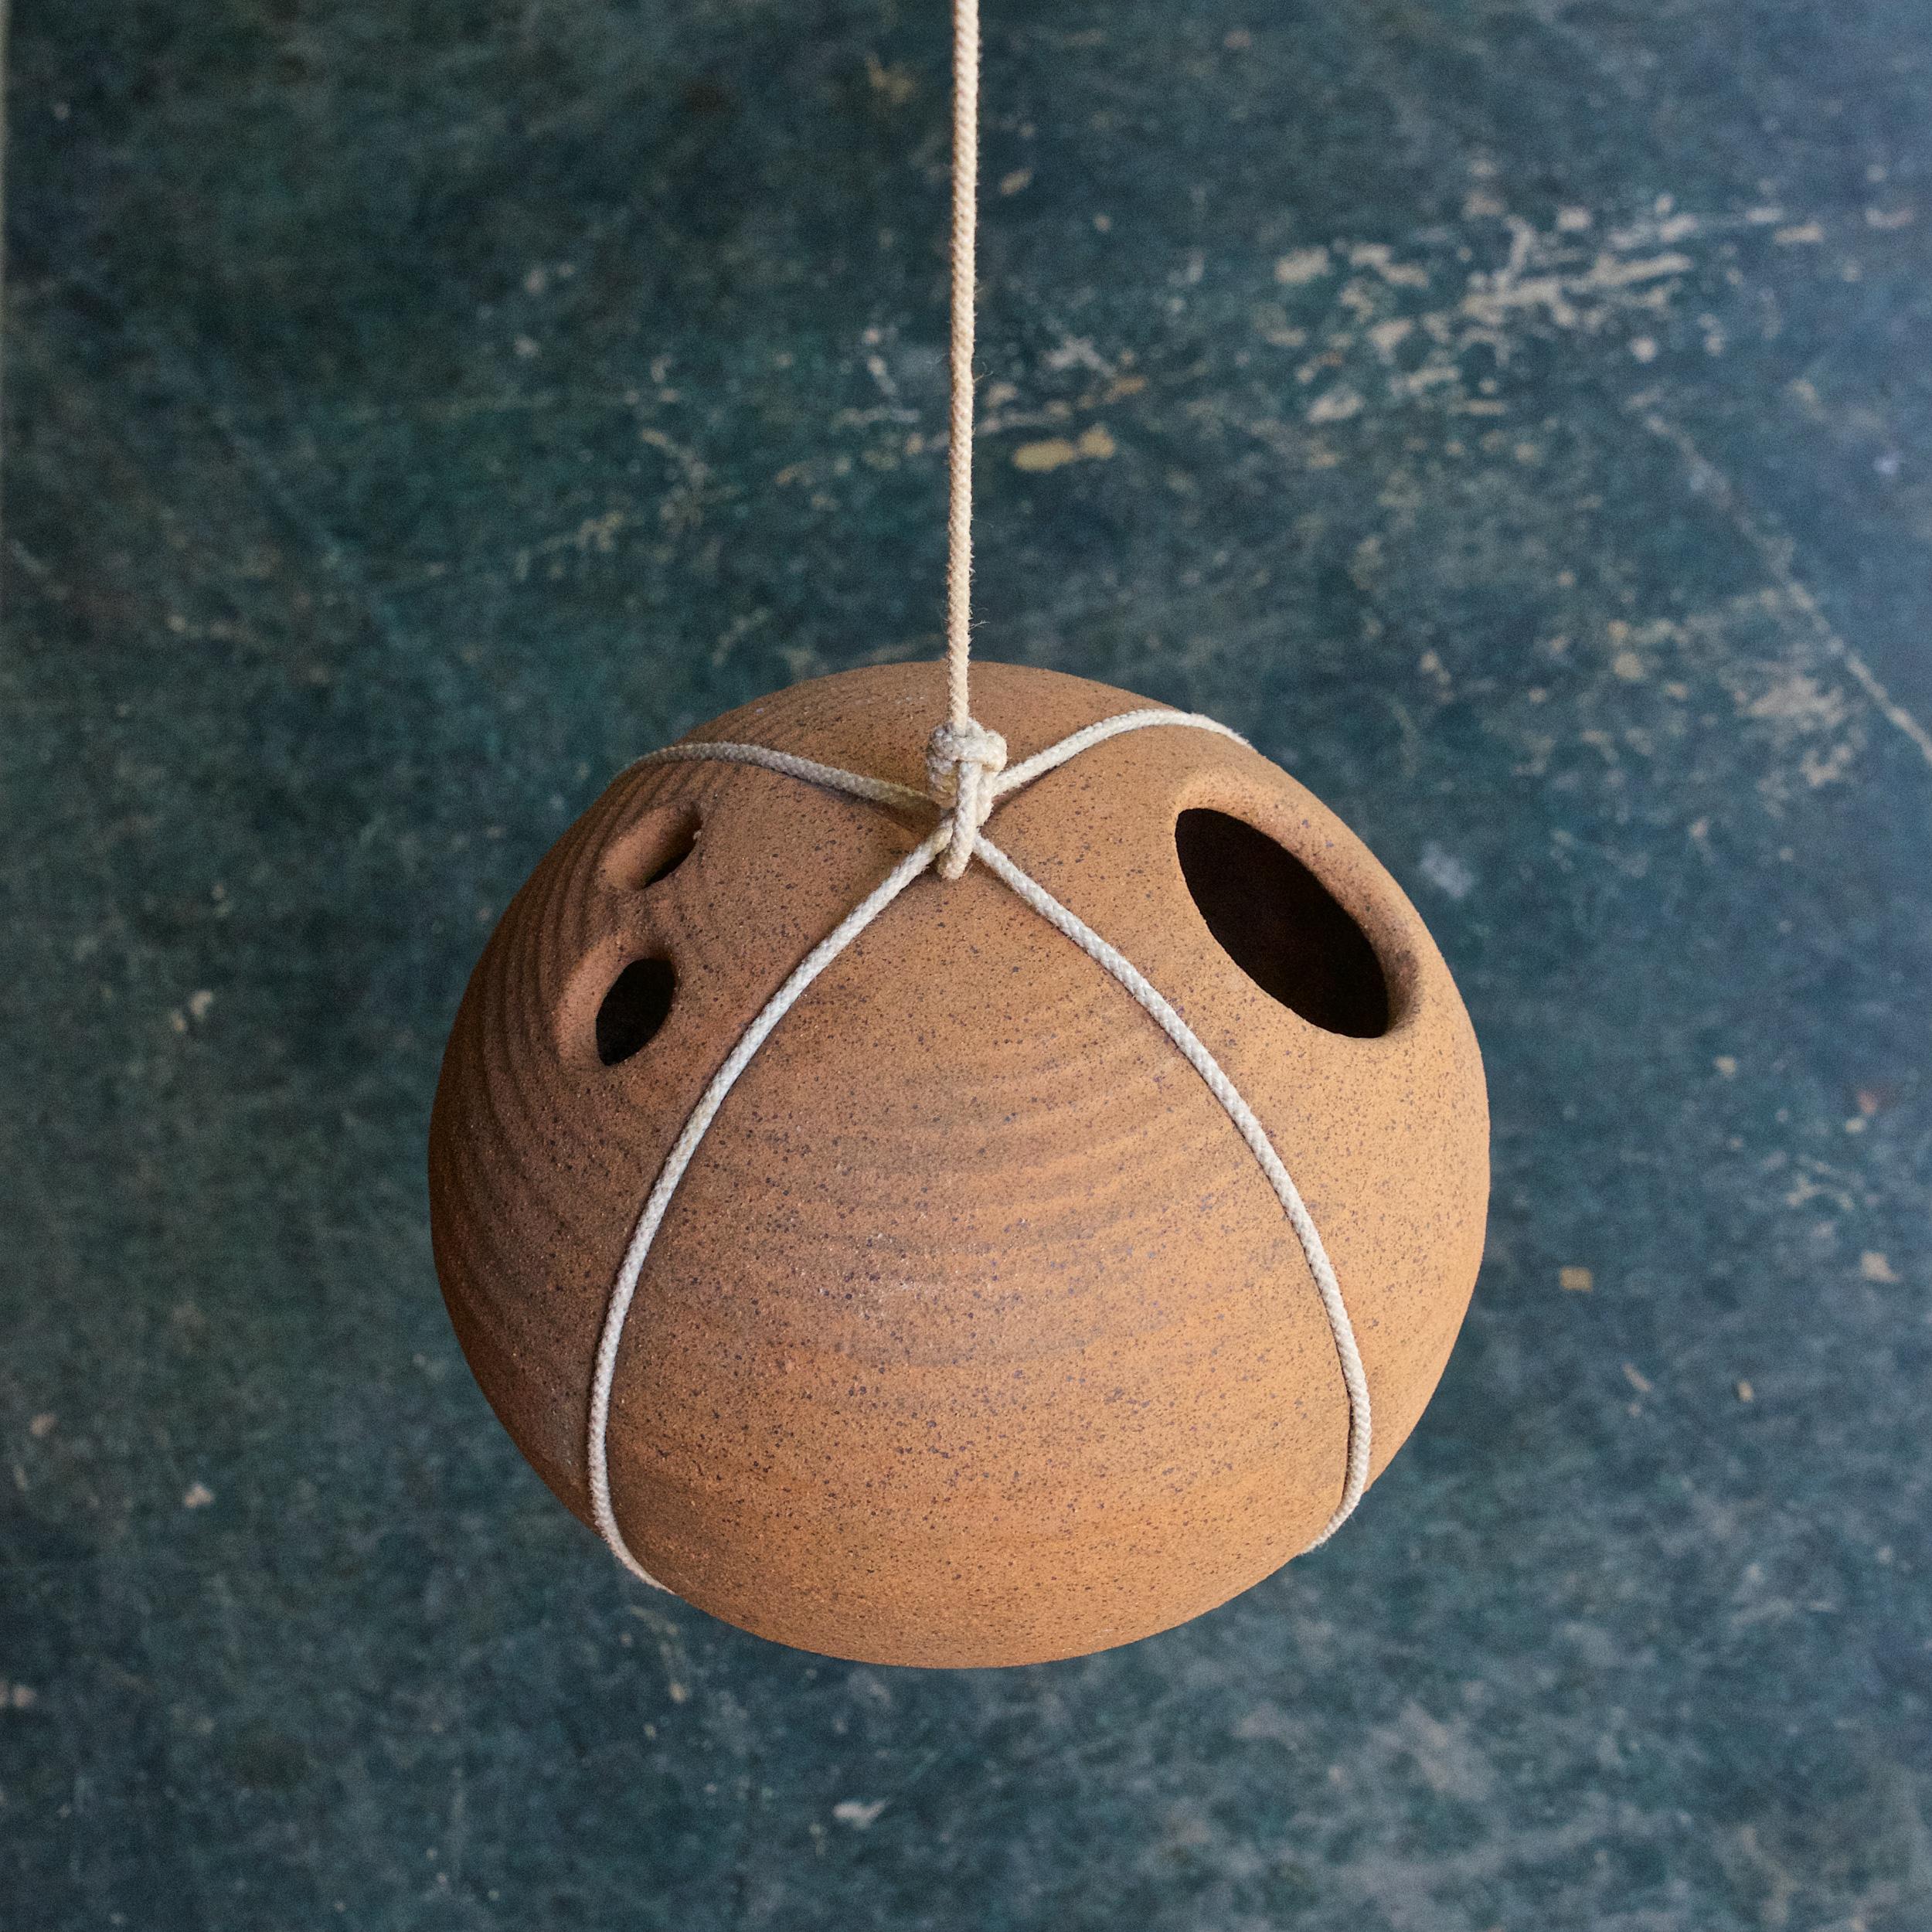 Hand-Crafted Midcentury String and Stoneware Ball Birdhouse Architectural Pottery Folk Art